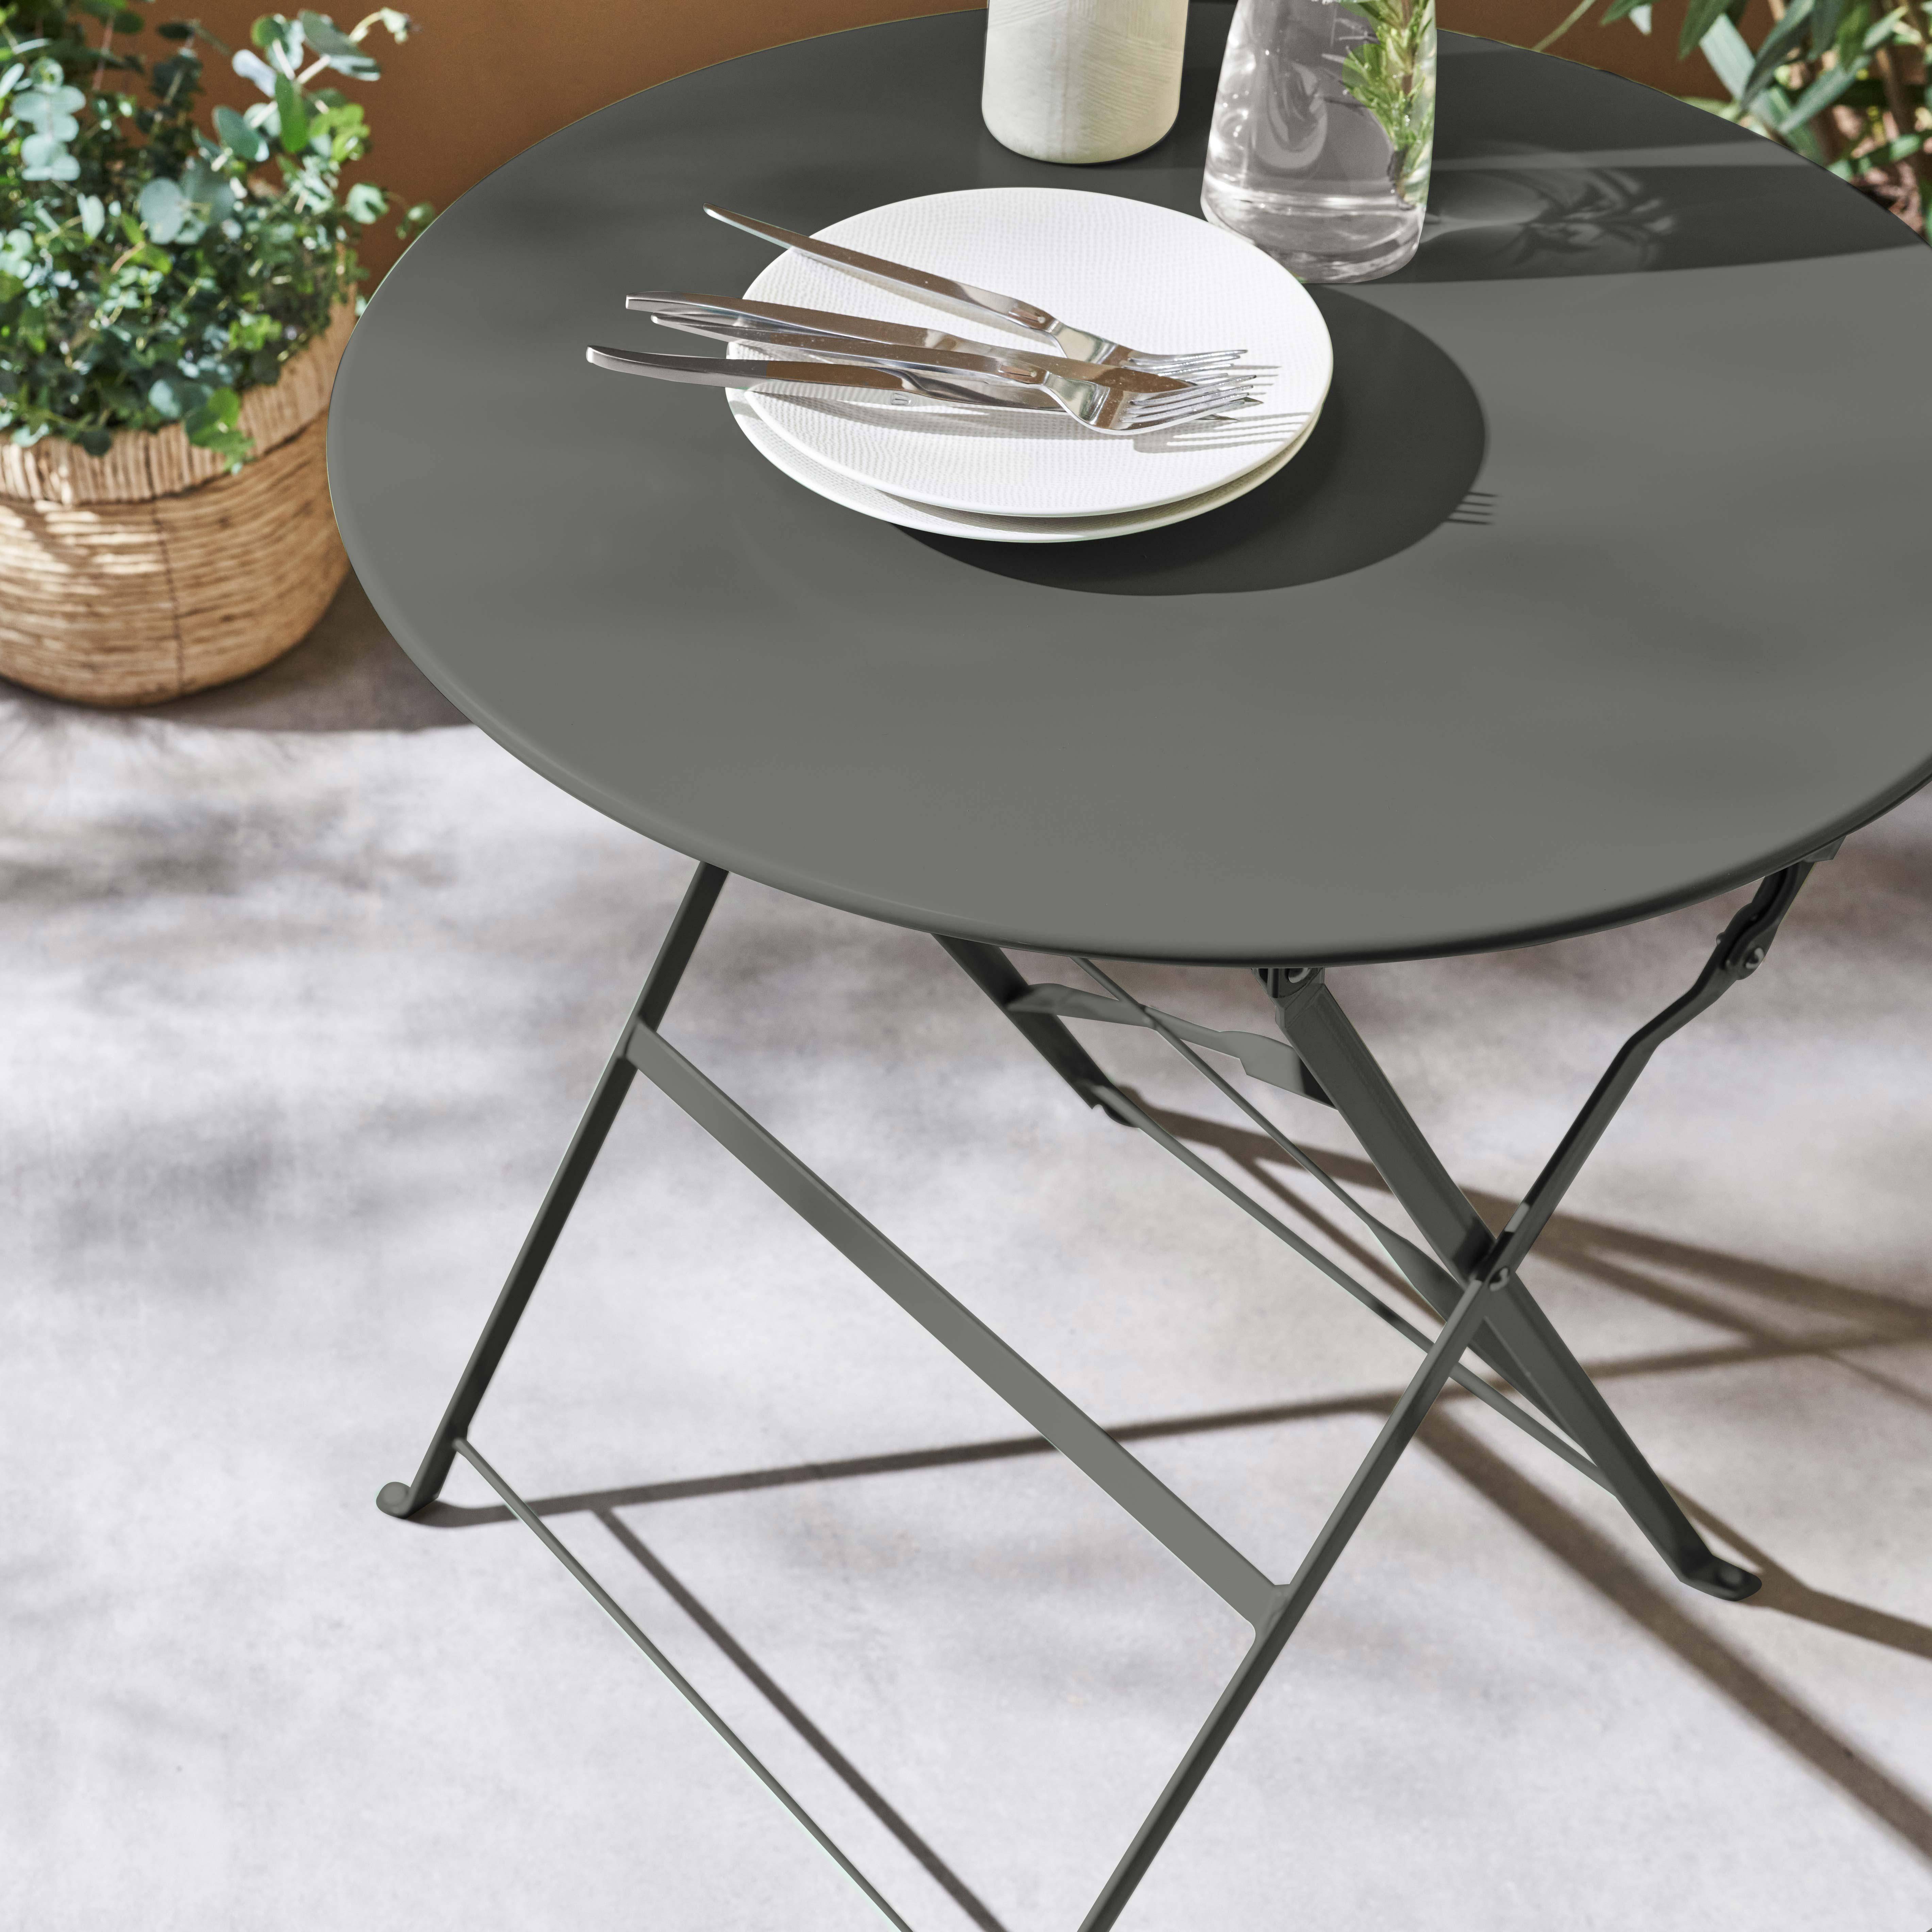 Foldable bistro garden table - Round Emilia anthracite- Round table Ø60cm, thermo-lacquered steel Photo2